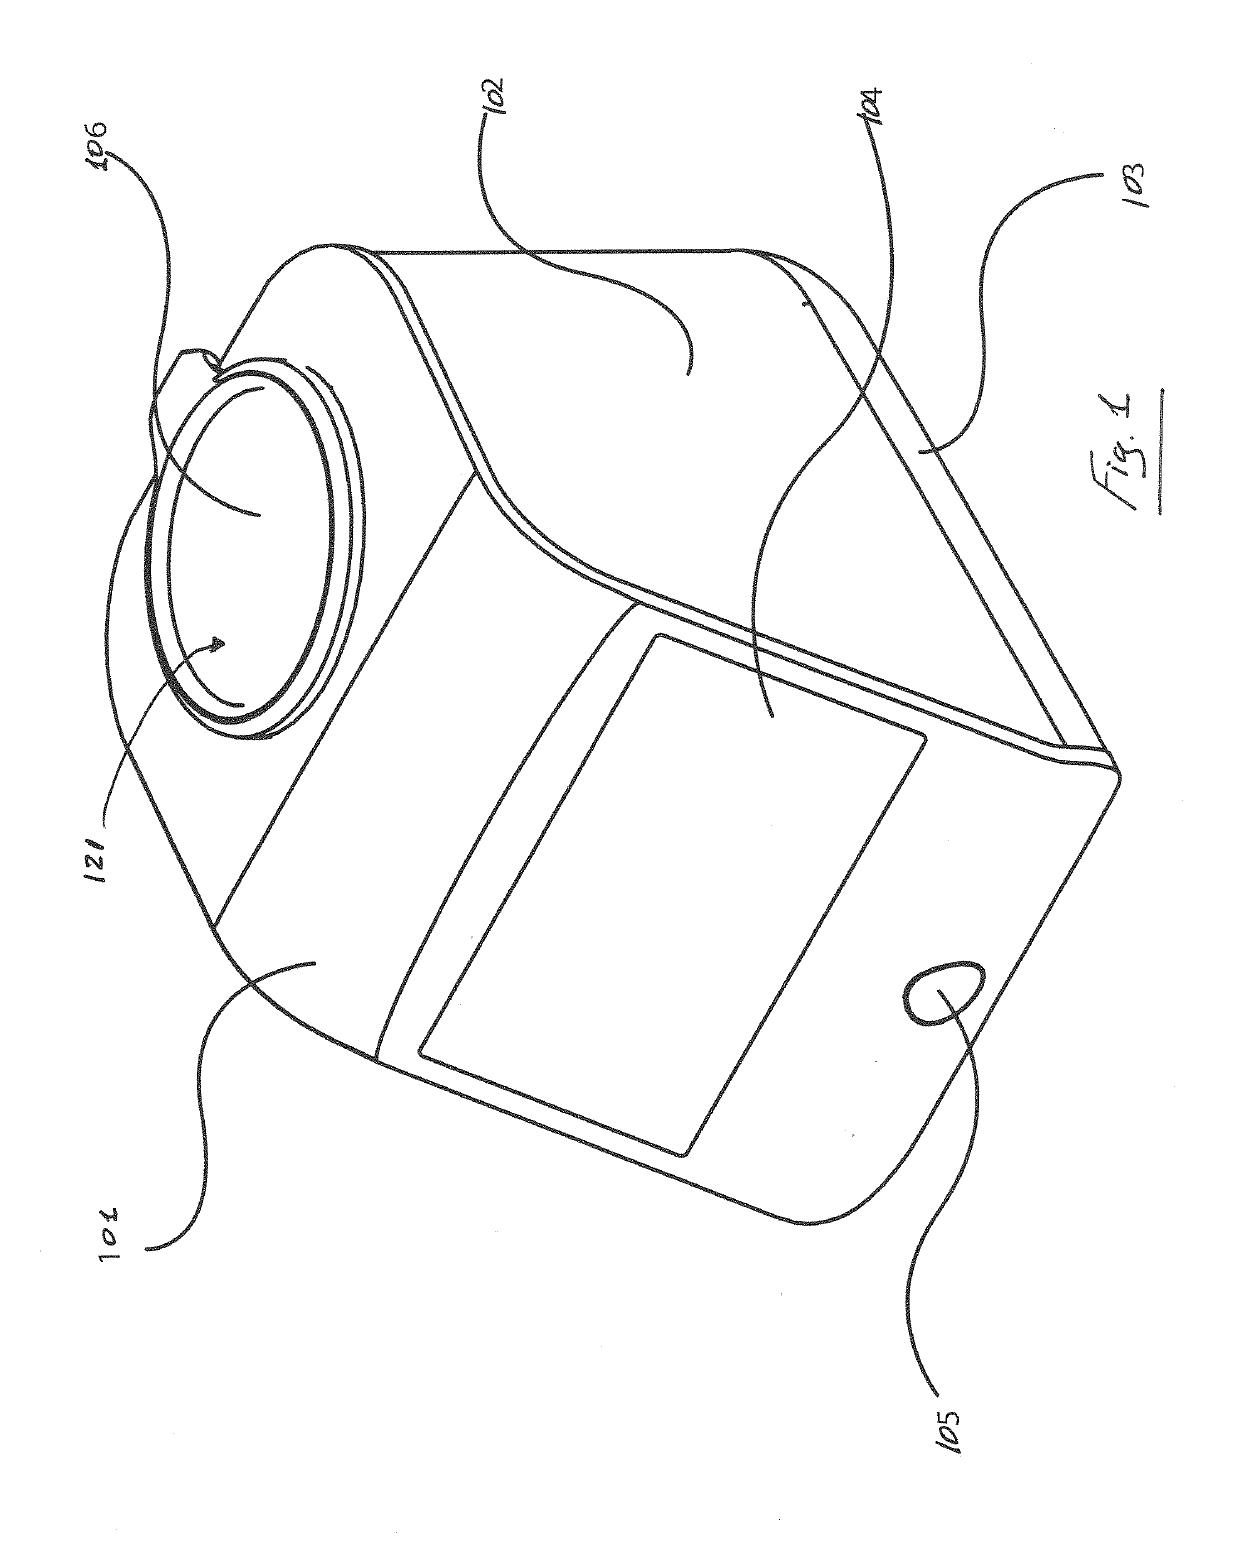 Docking station for an enteral feeding device